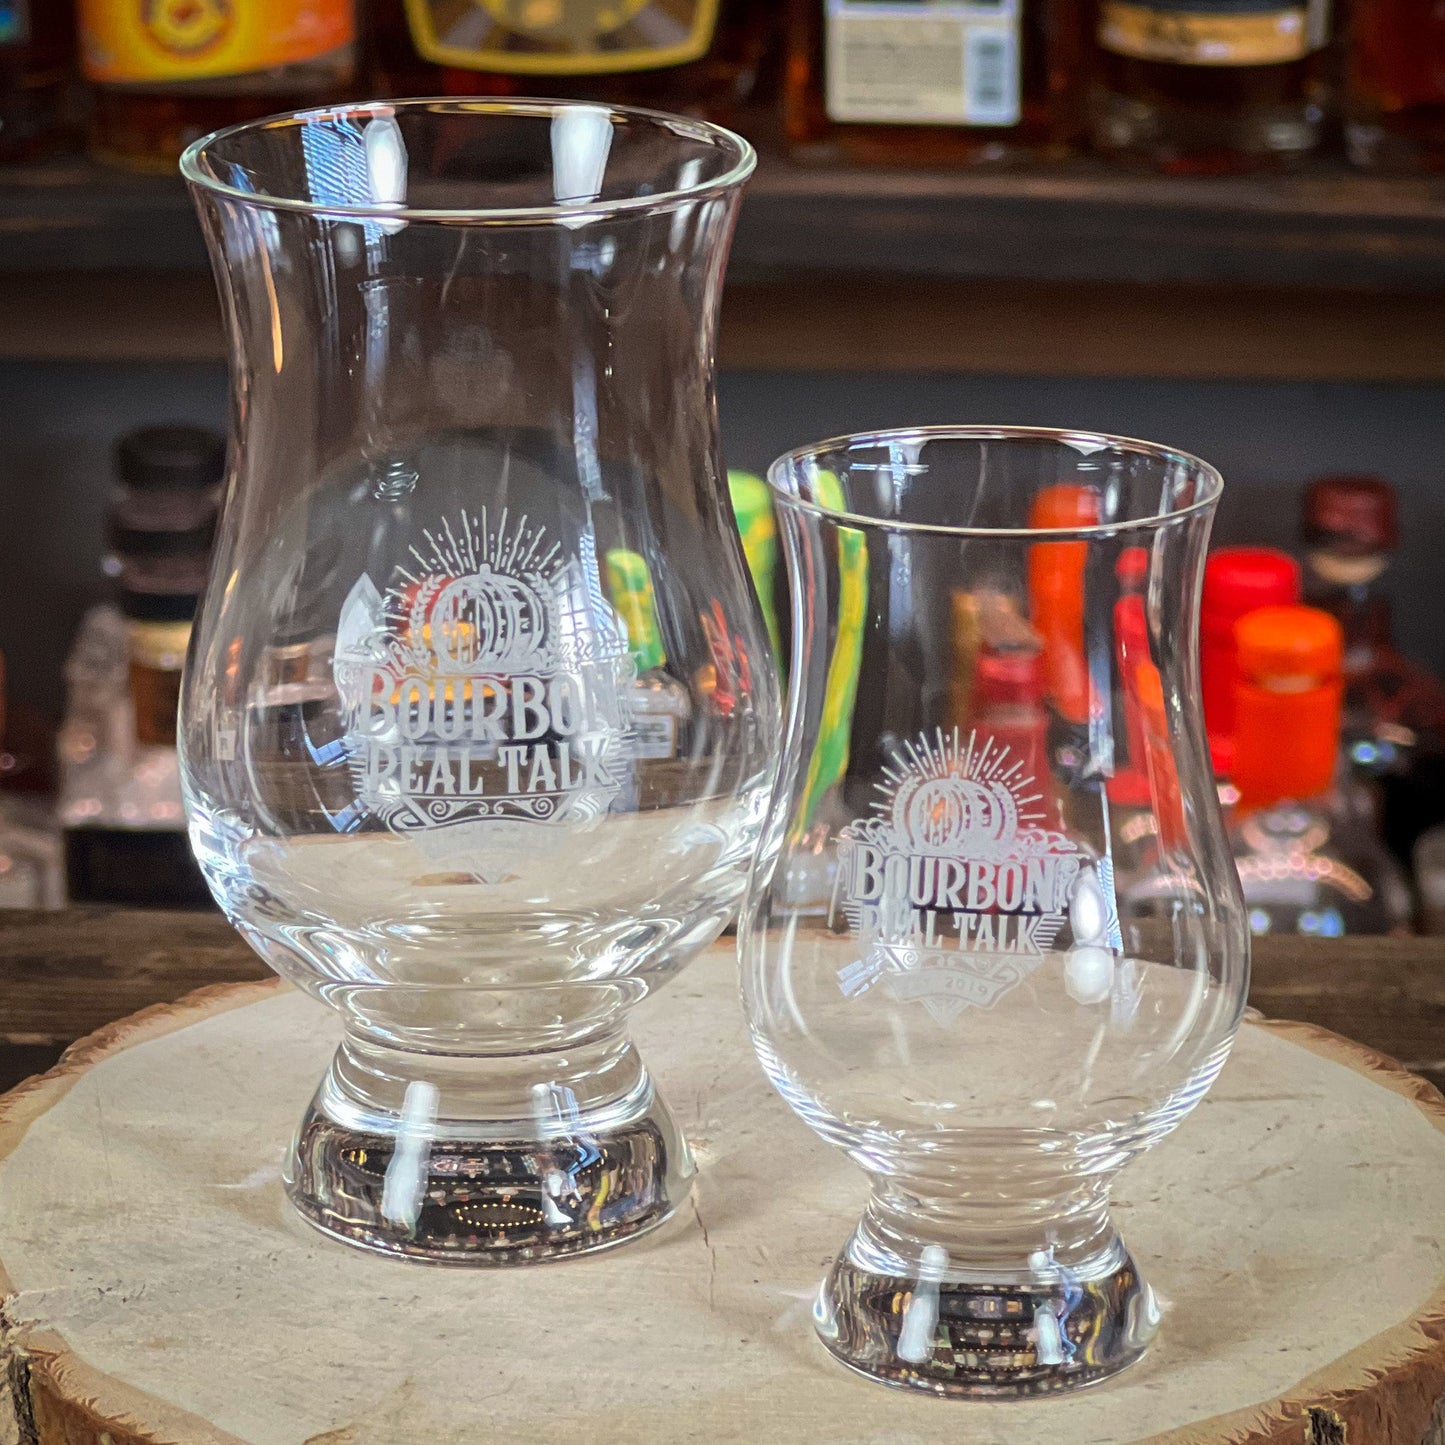 3oz. and 6oz Bourbon Real Talk™ Tasting Nosing Glass on a piece of wood with whiskey bottles in the background